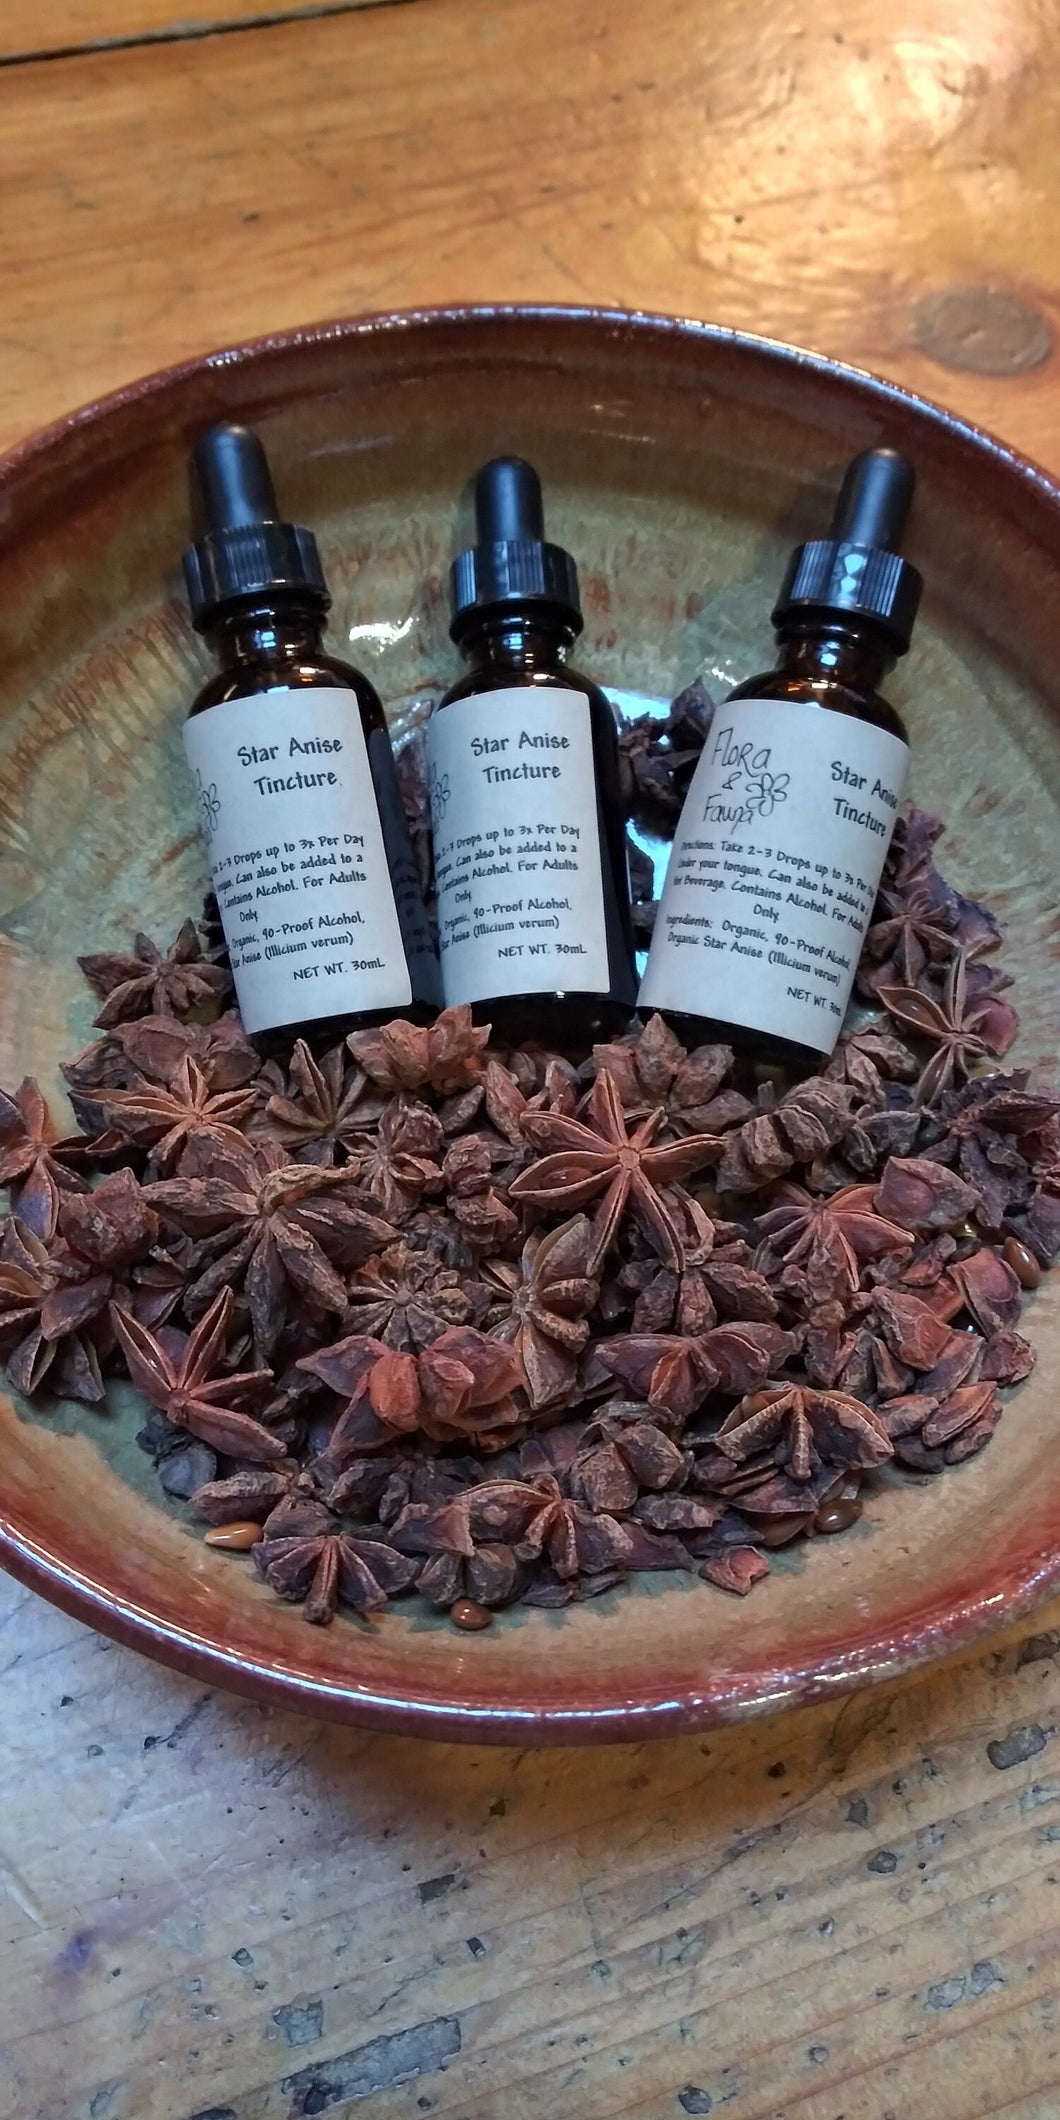 Organic Star Anise Extract/Tincture - 1oz/30mL Bottle with Dropper